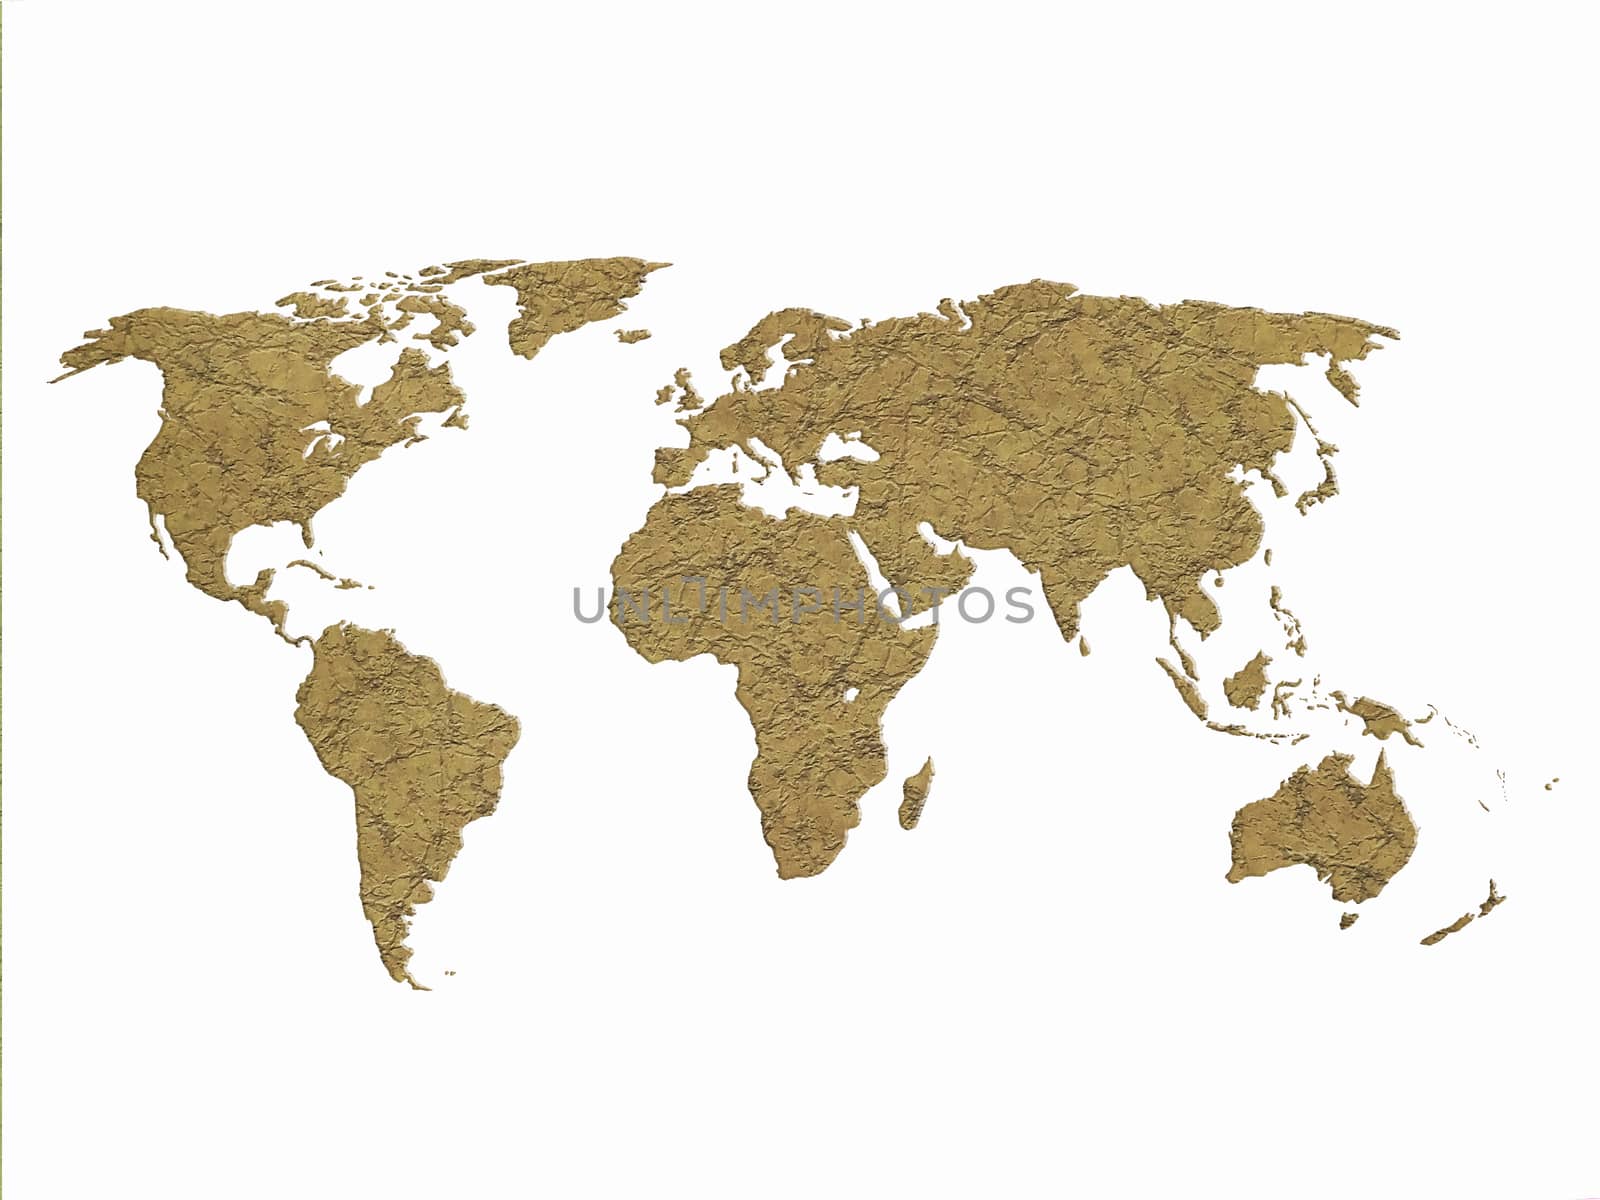 dry world map isolated on white